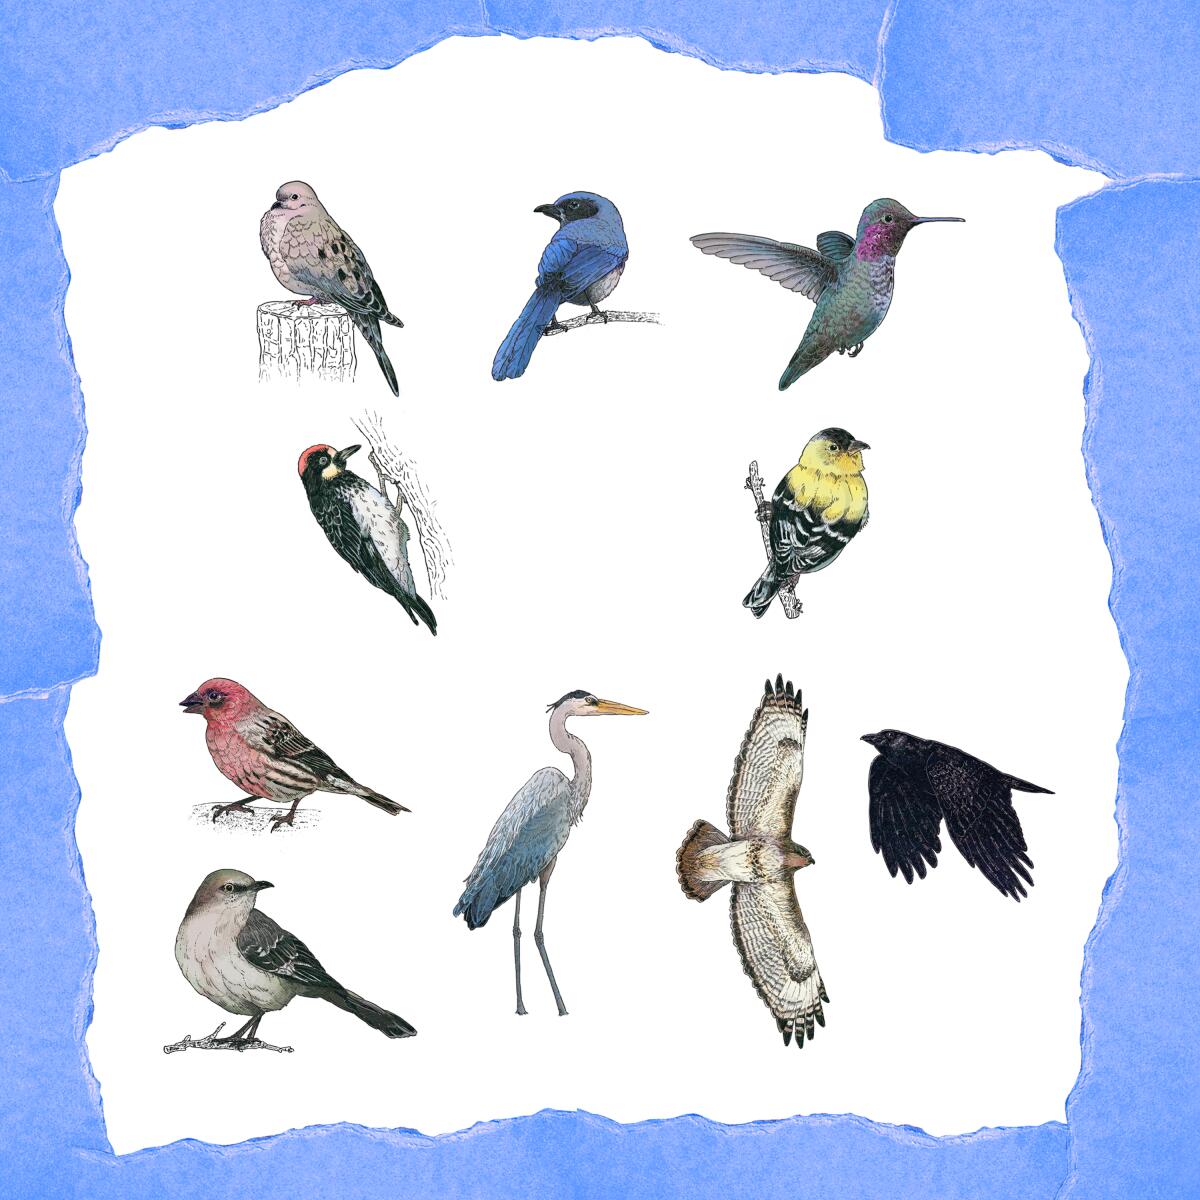 Drawings of 10 different birds against a white background.